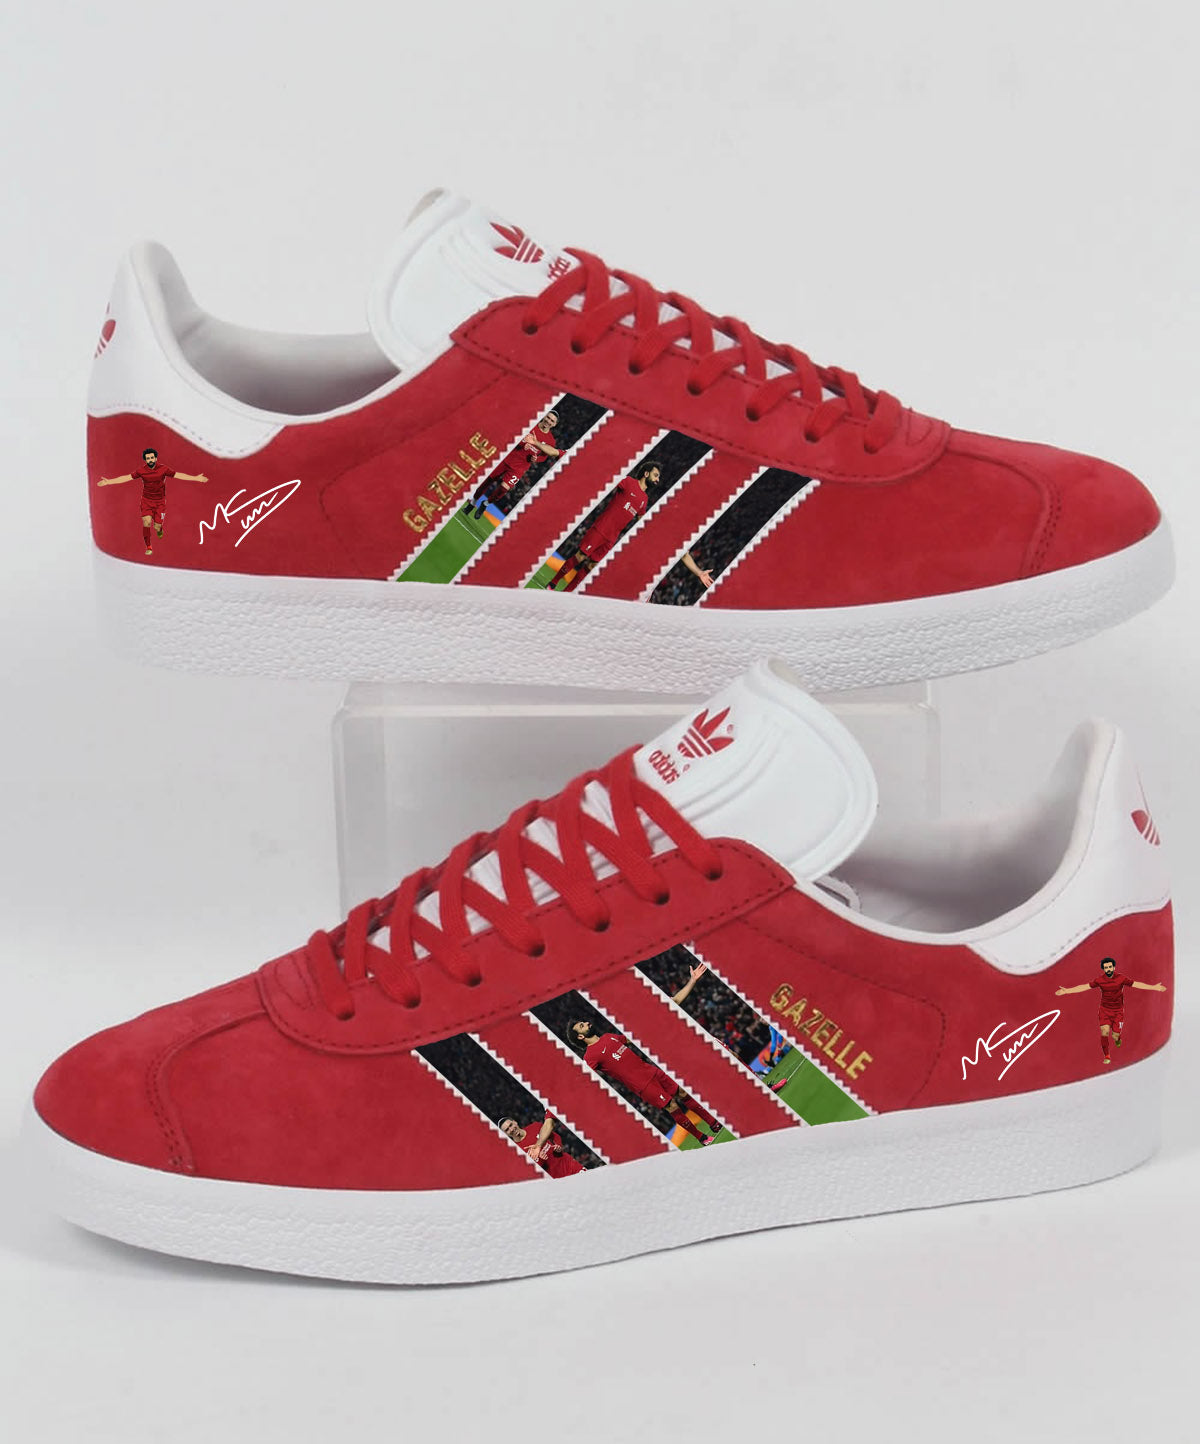 Limited edition Liverpool FC Mo Salah inspired red / white Adidas custom Gazelle trainers / sneakers